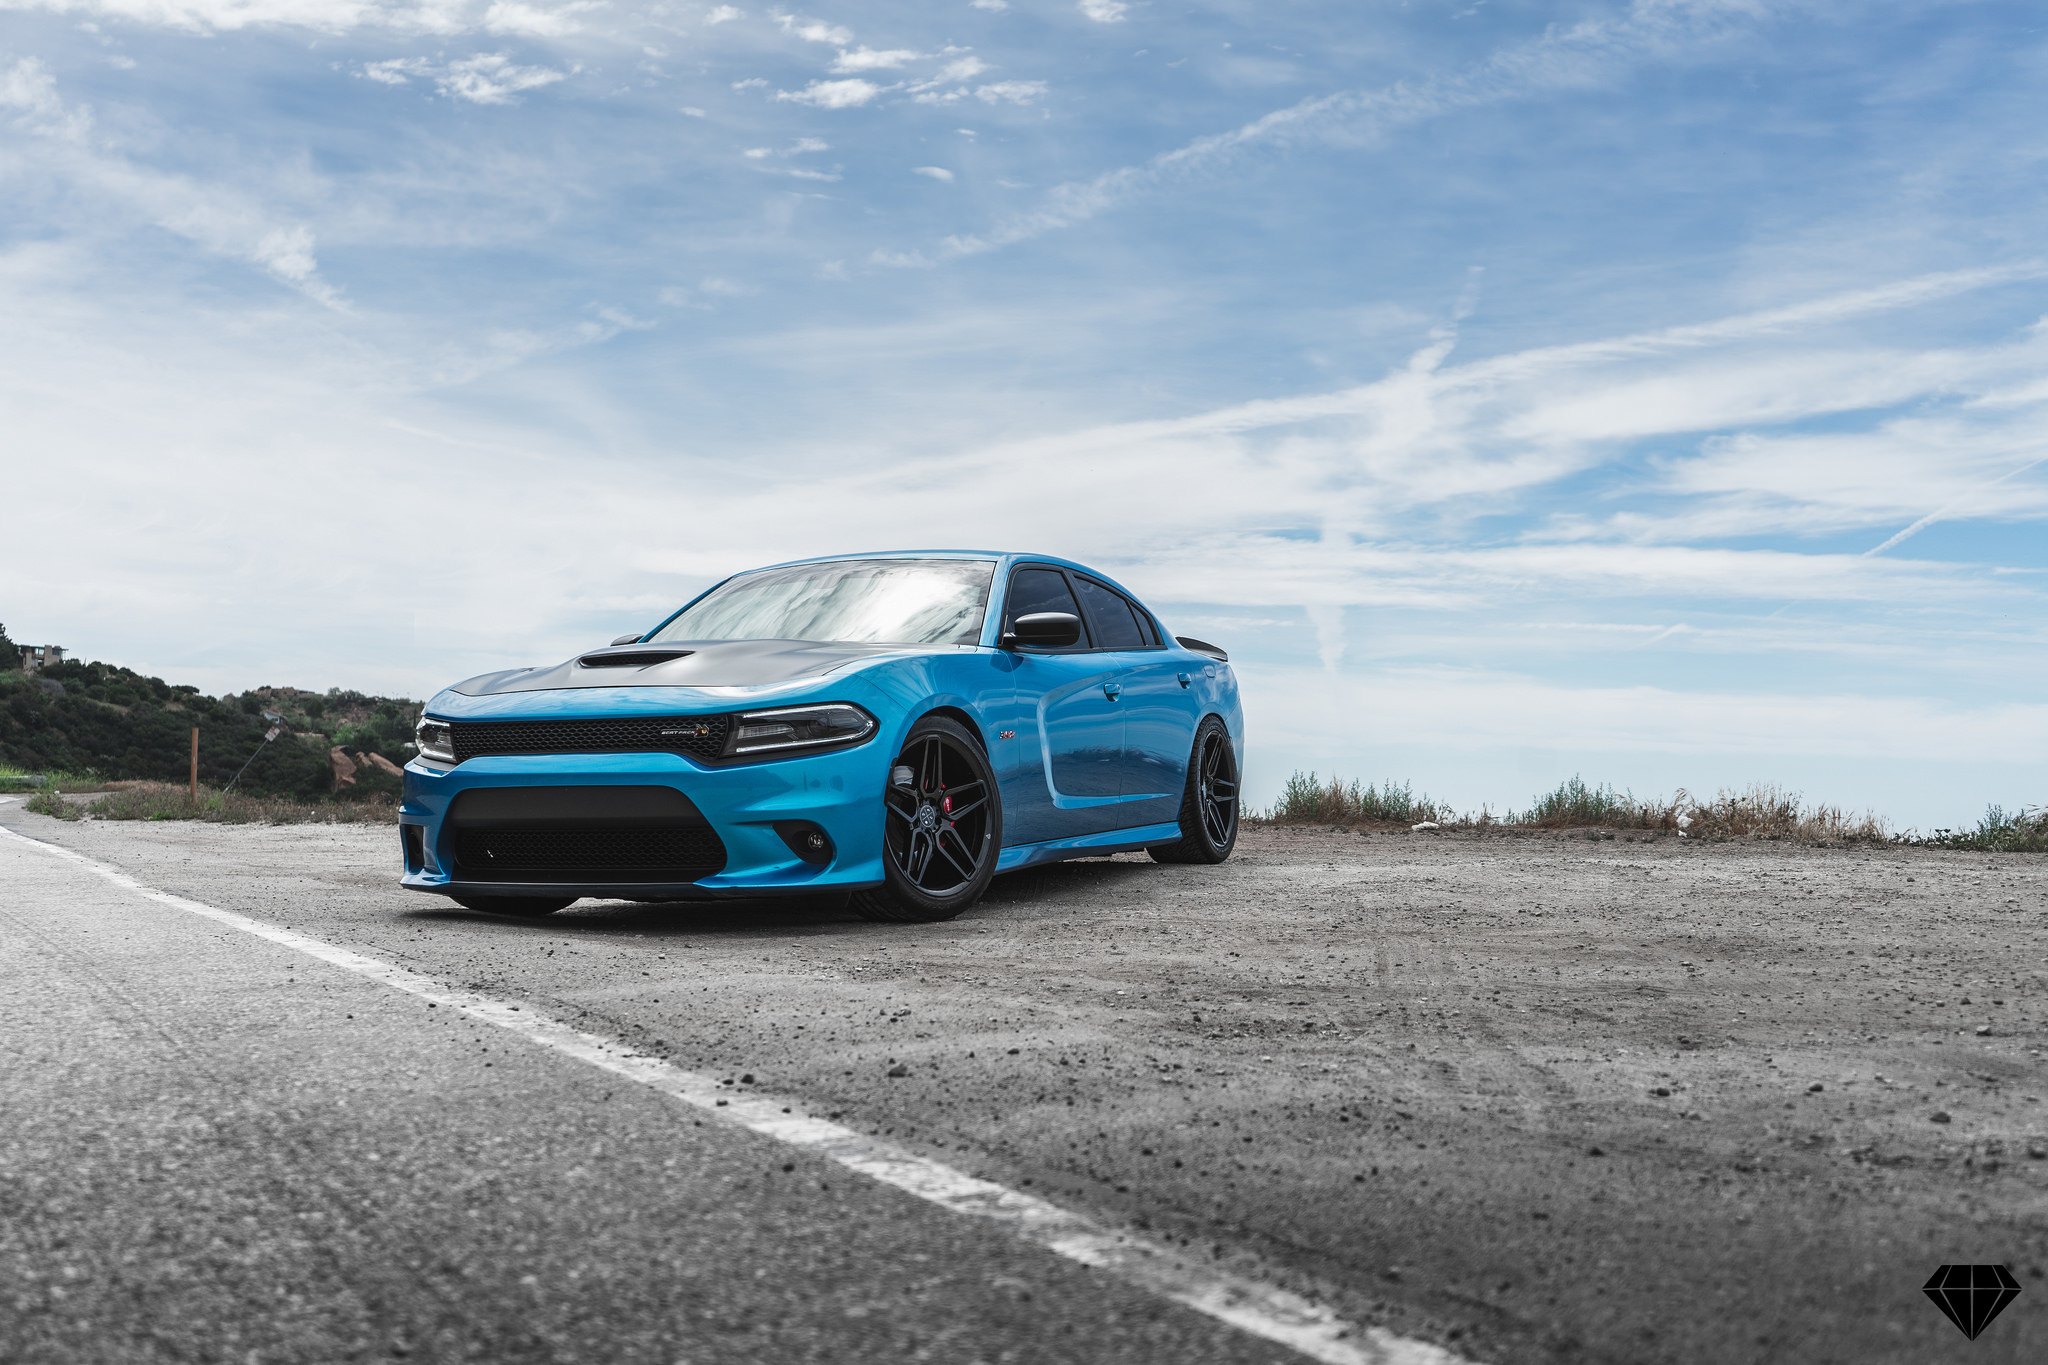 Custom Hood with Air Vent on Blue Dodge Charger - Photo by Blaque Diamond Wheels